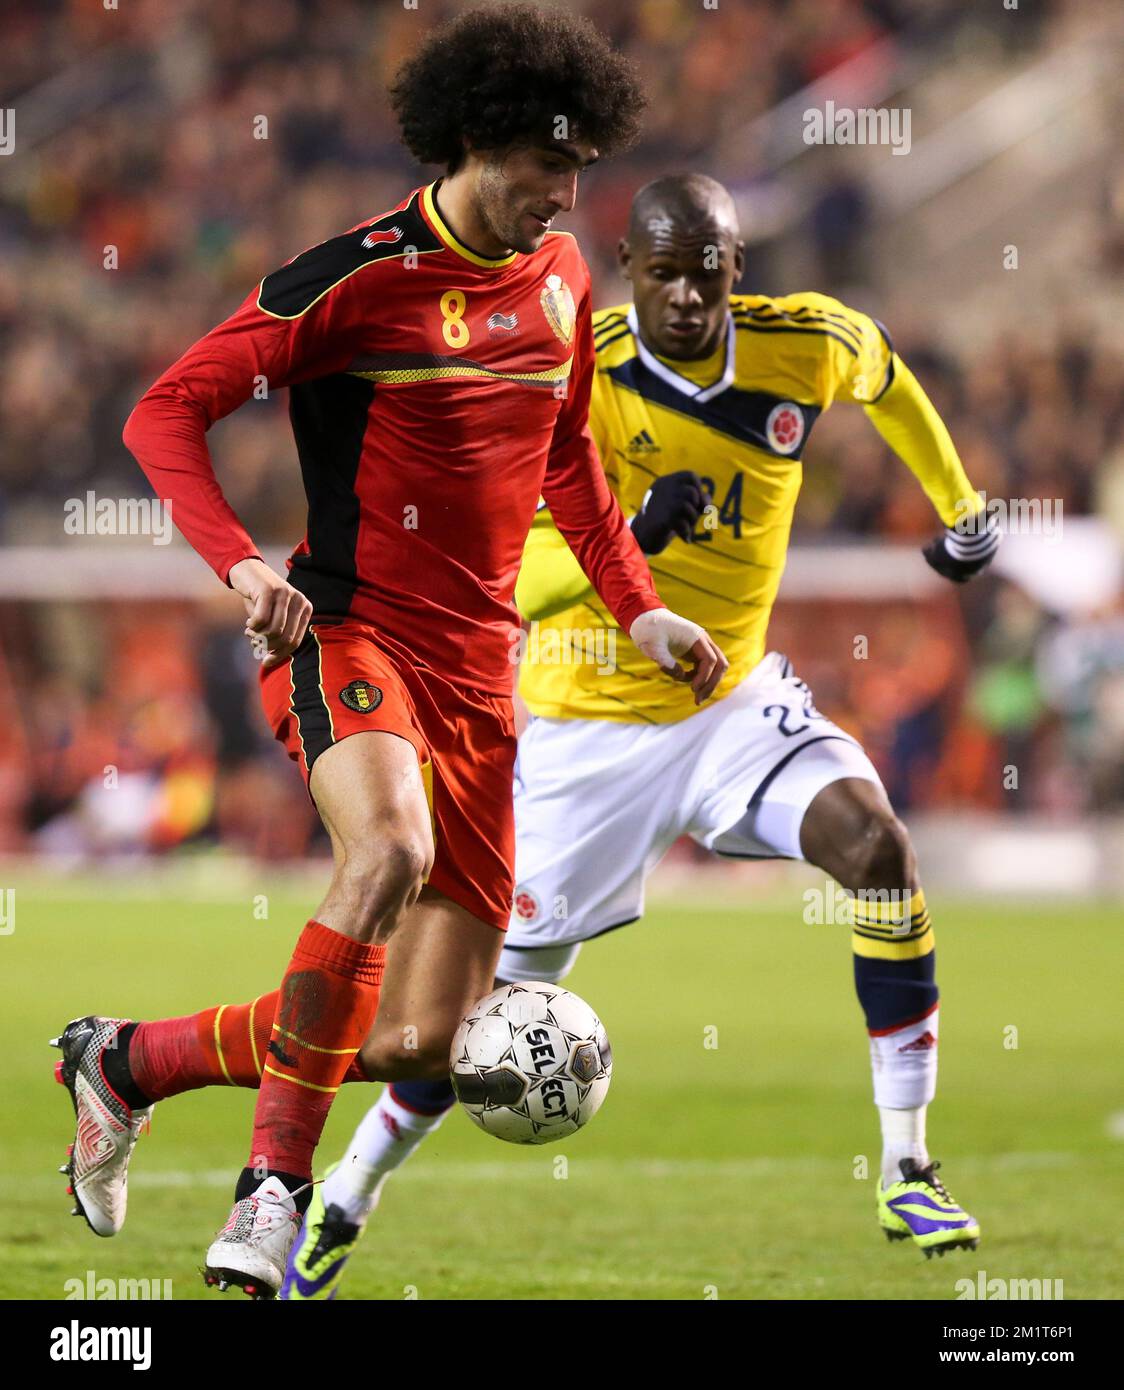 Belgium's Marouane Fellaini and Colombia's Victor Ibarbo fight for the ball during a friendly soccer game between the Belgian national soccer team Red Devils and Colombia, at the Koning Boudewijn Stadion - Stade Roi Baudouin in Brussels, on Thursday 14 November 2013. BELGA PHOTO VIRGINIE LEFOUR Stock Photo